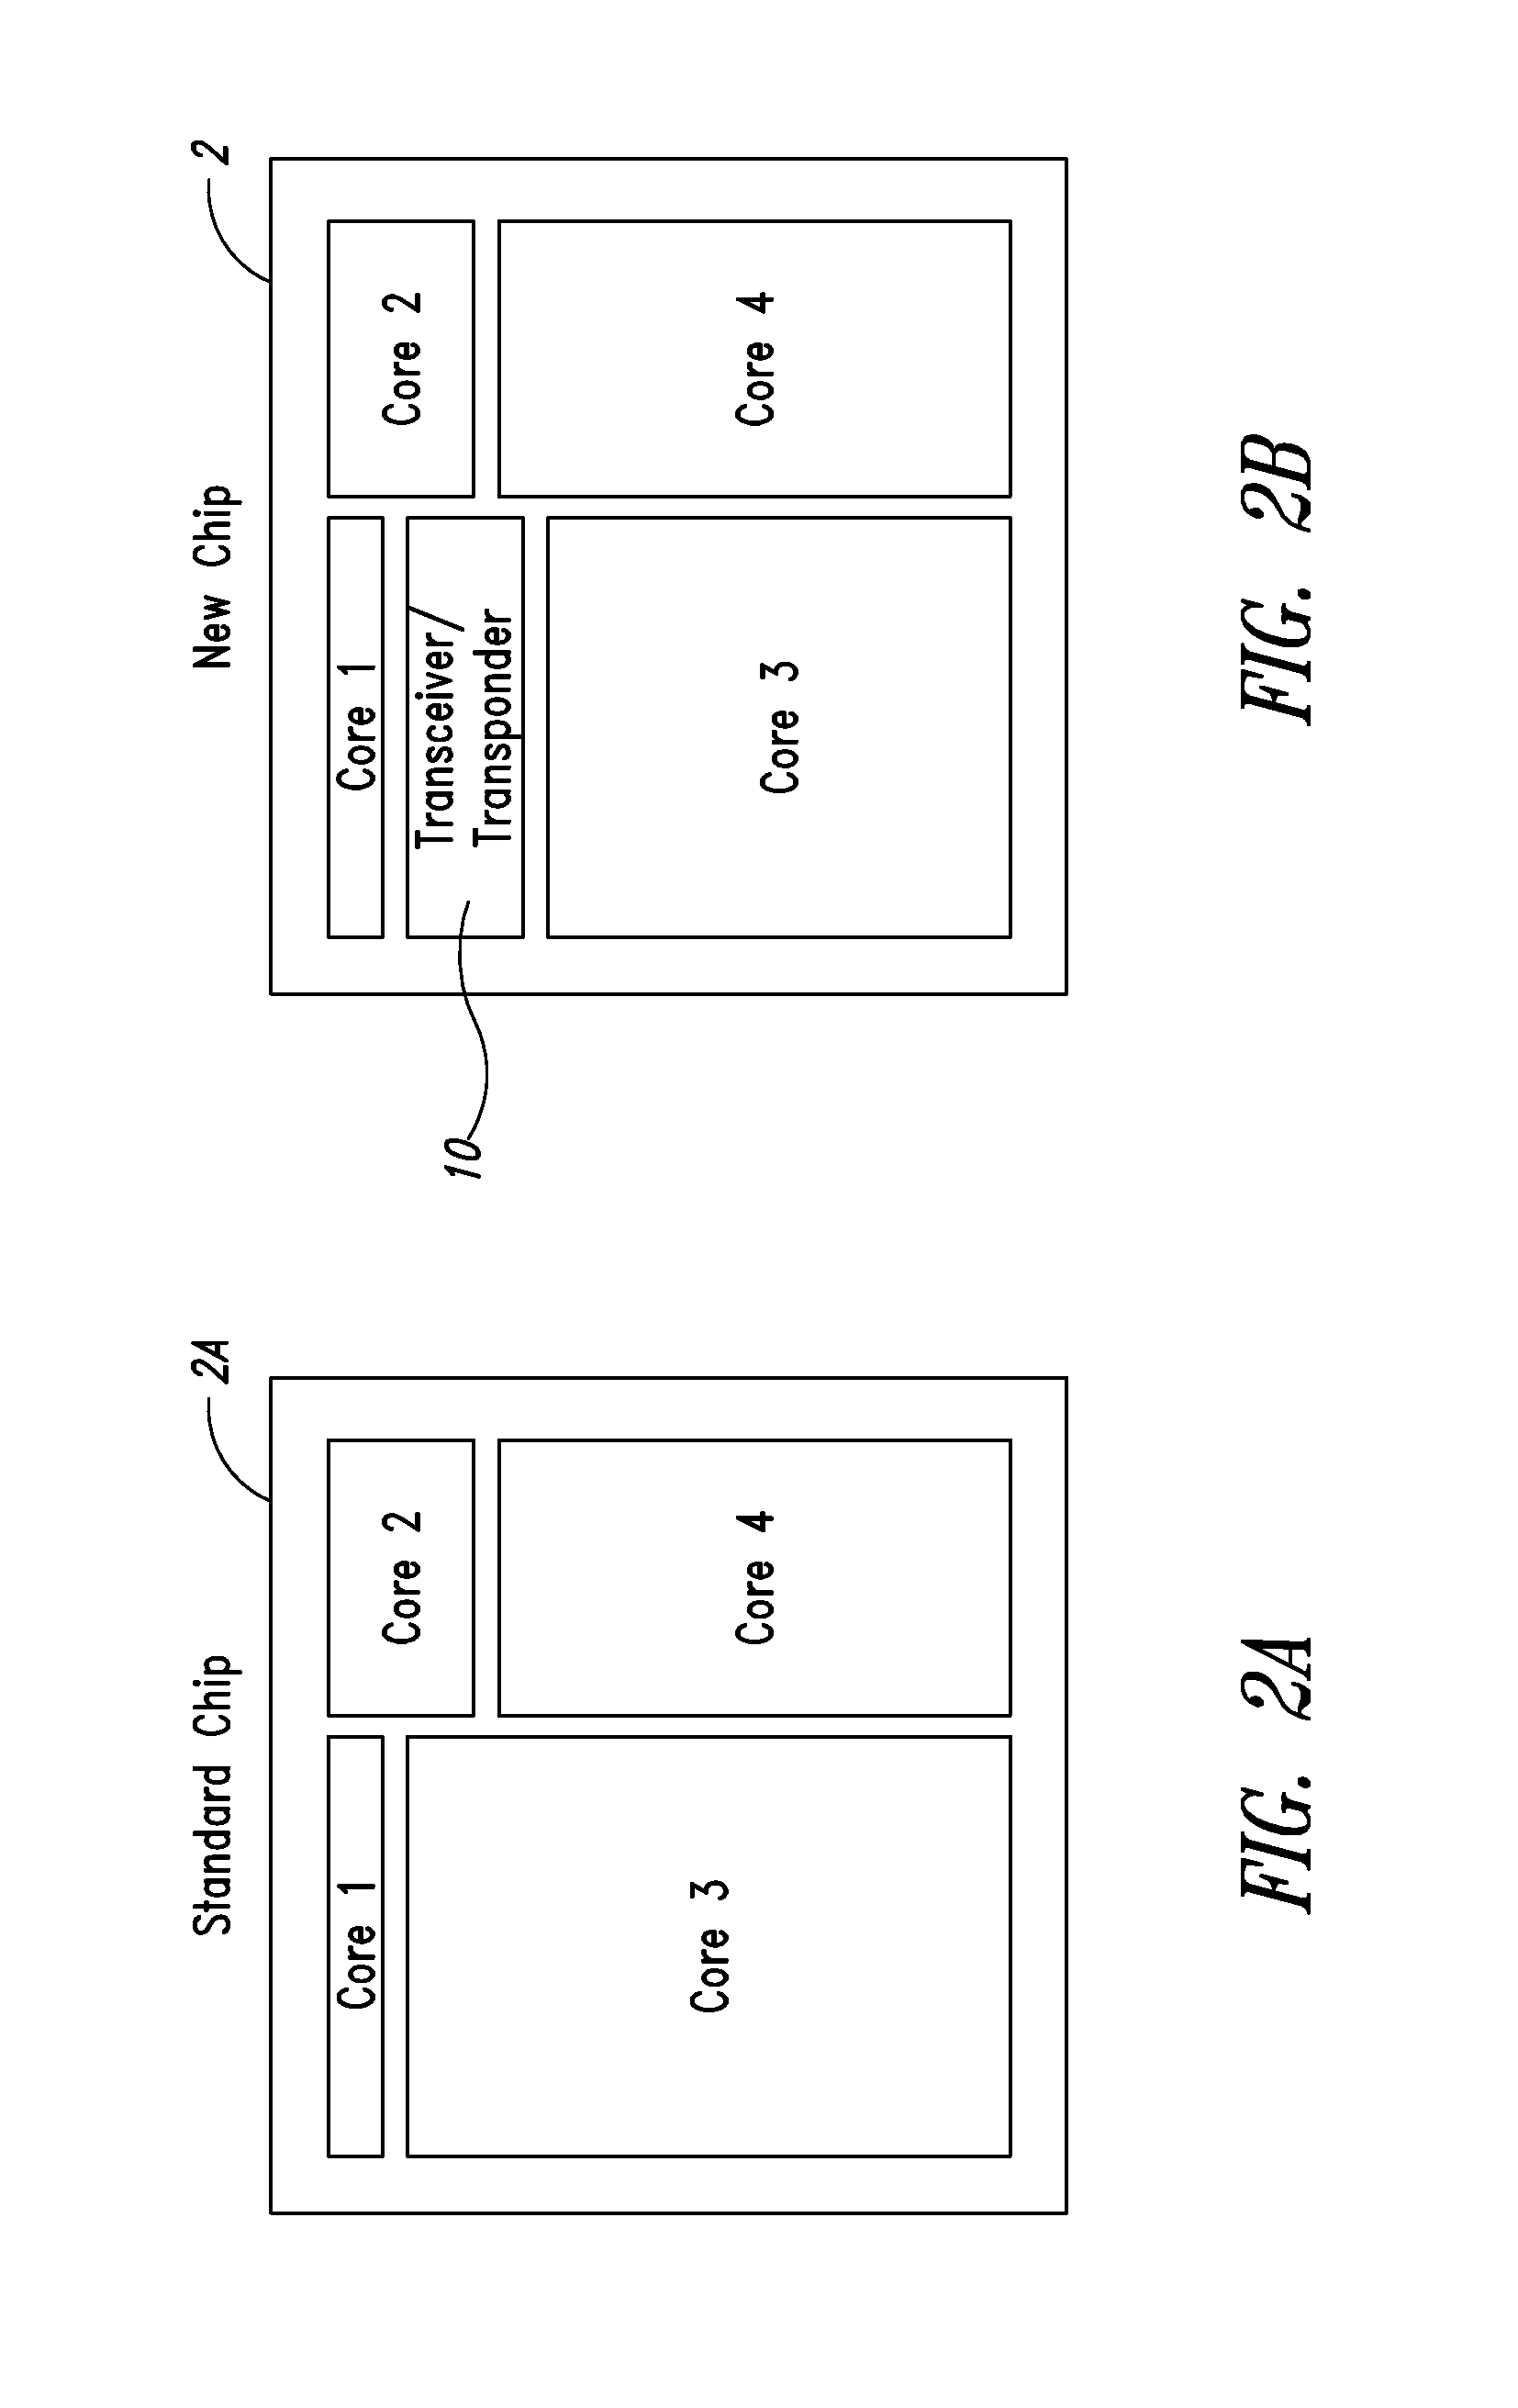 Circuit architecture for the parallel supplying during an electric or electromagnetic testing of a plurality of electronic devices integrated on a semiconductor wafer